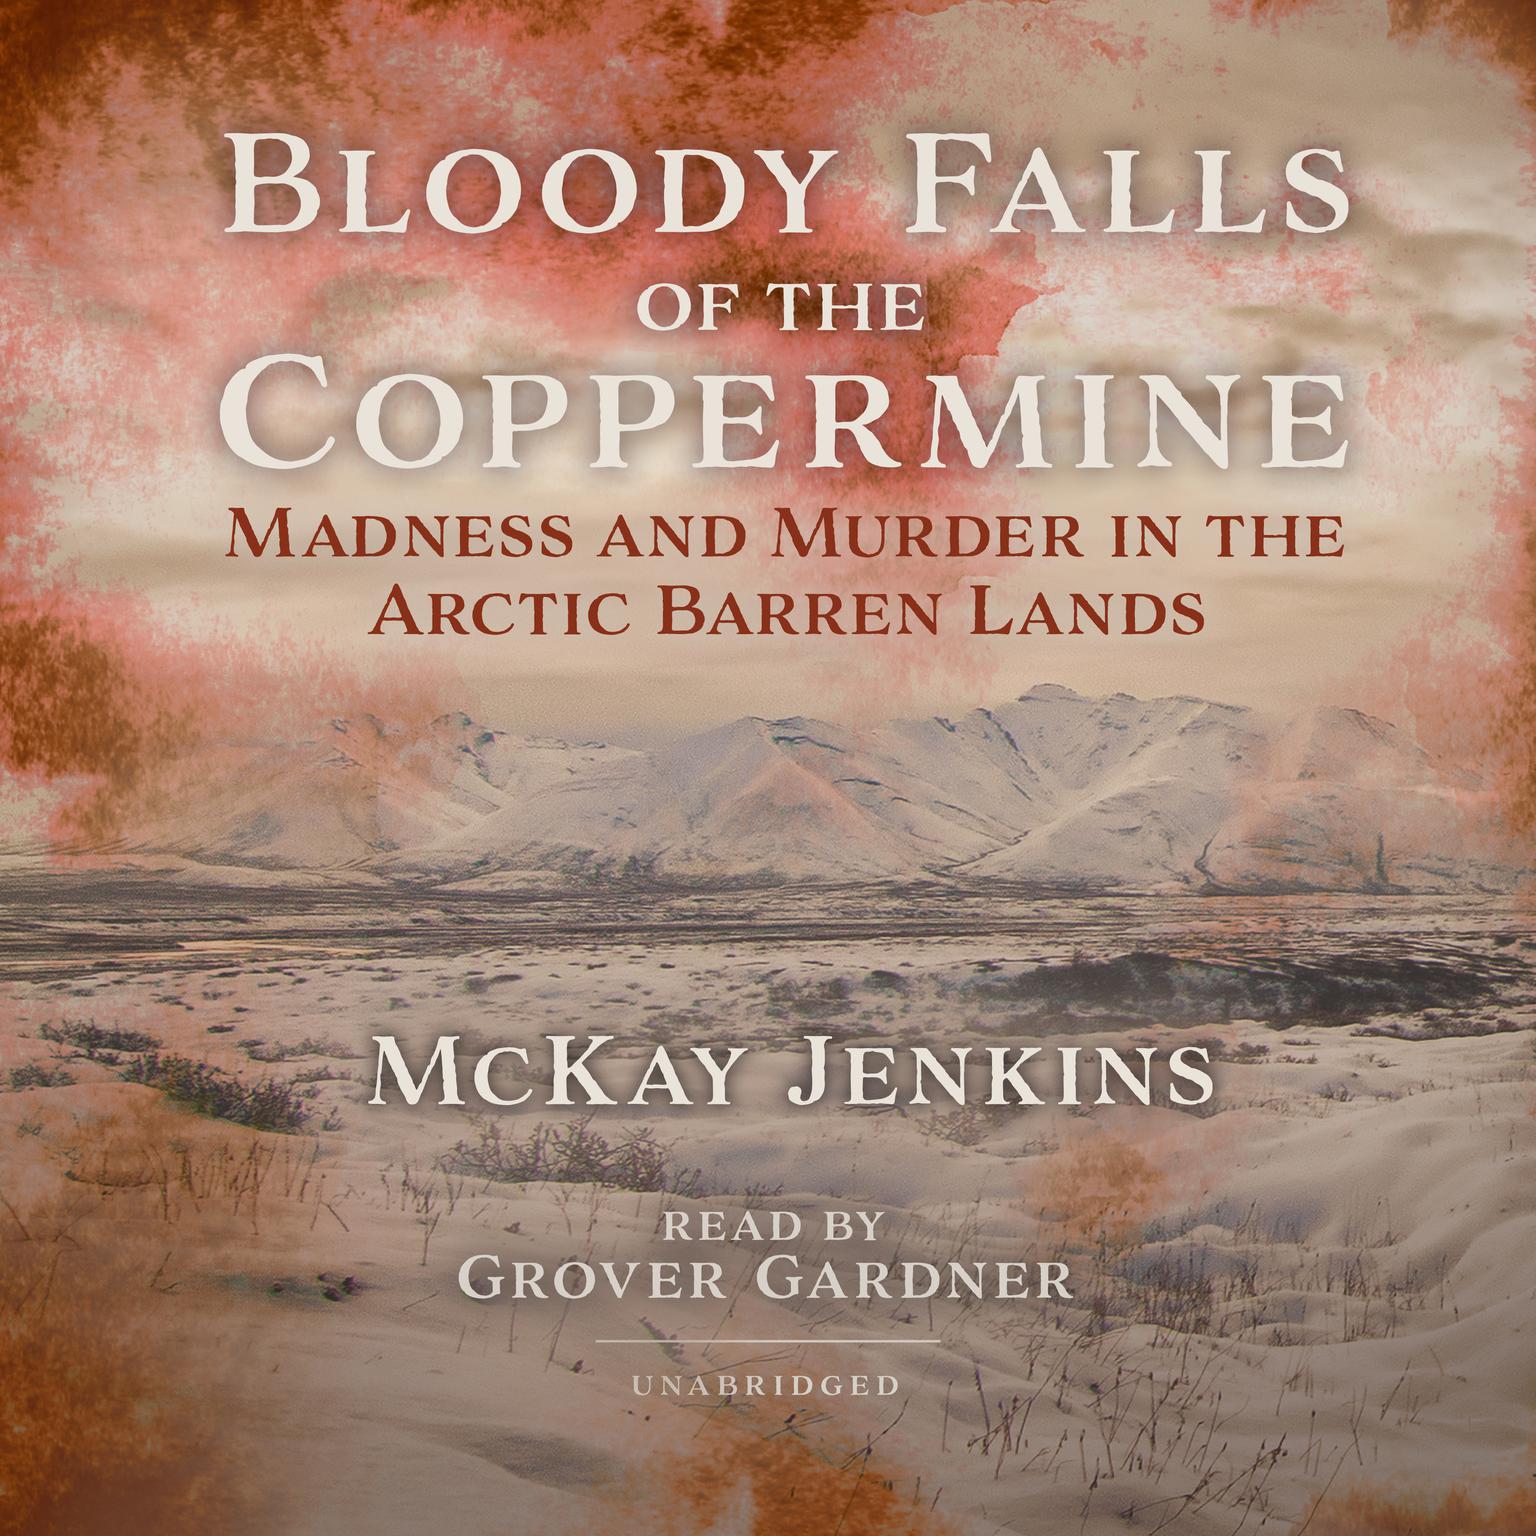 Bloody Falls of the Coppermine: Madness and Murder in the Arctic Barren Lands Audiobook, by McKay Jenkins